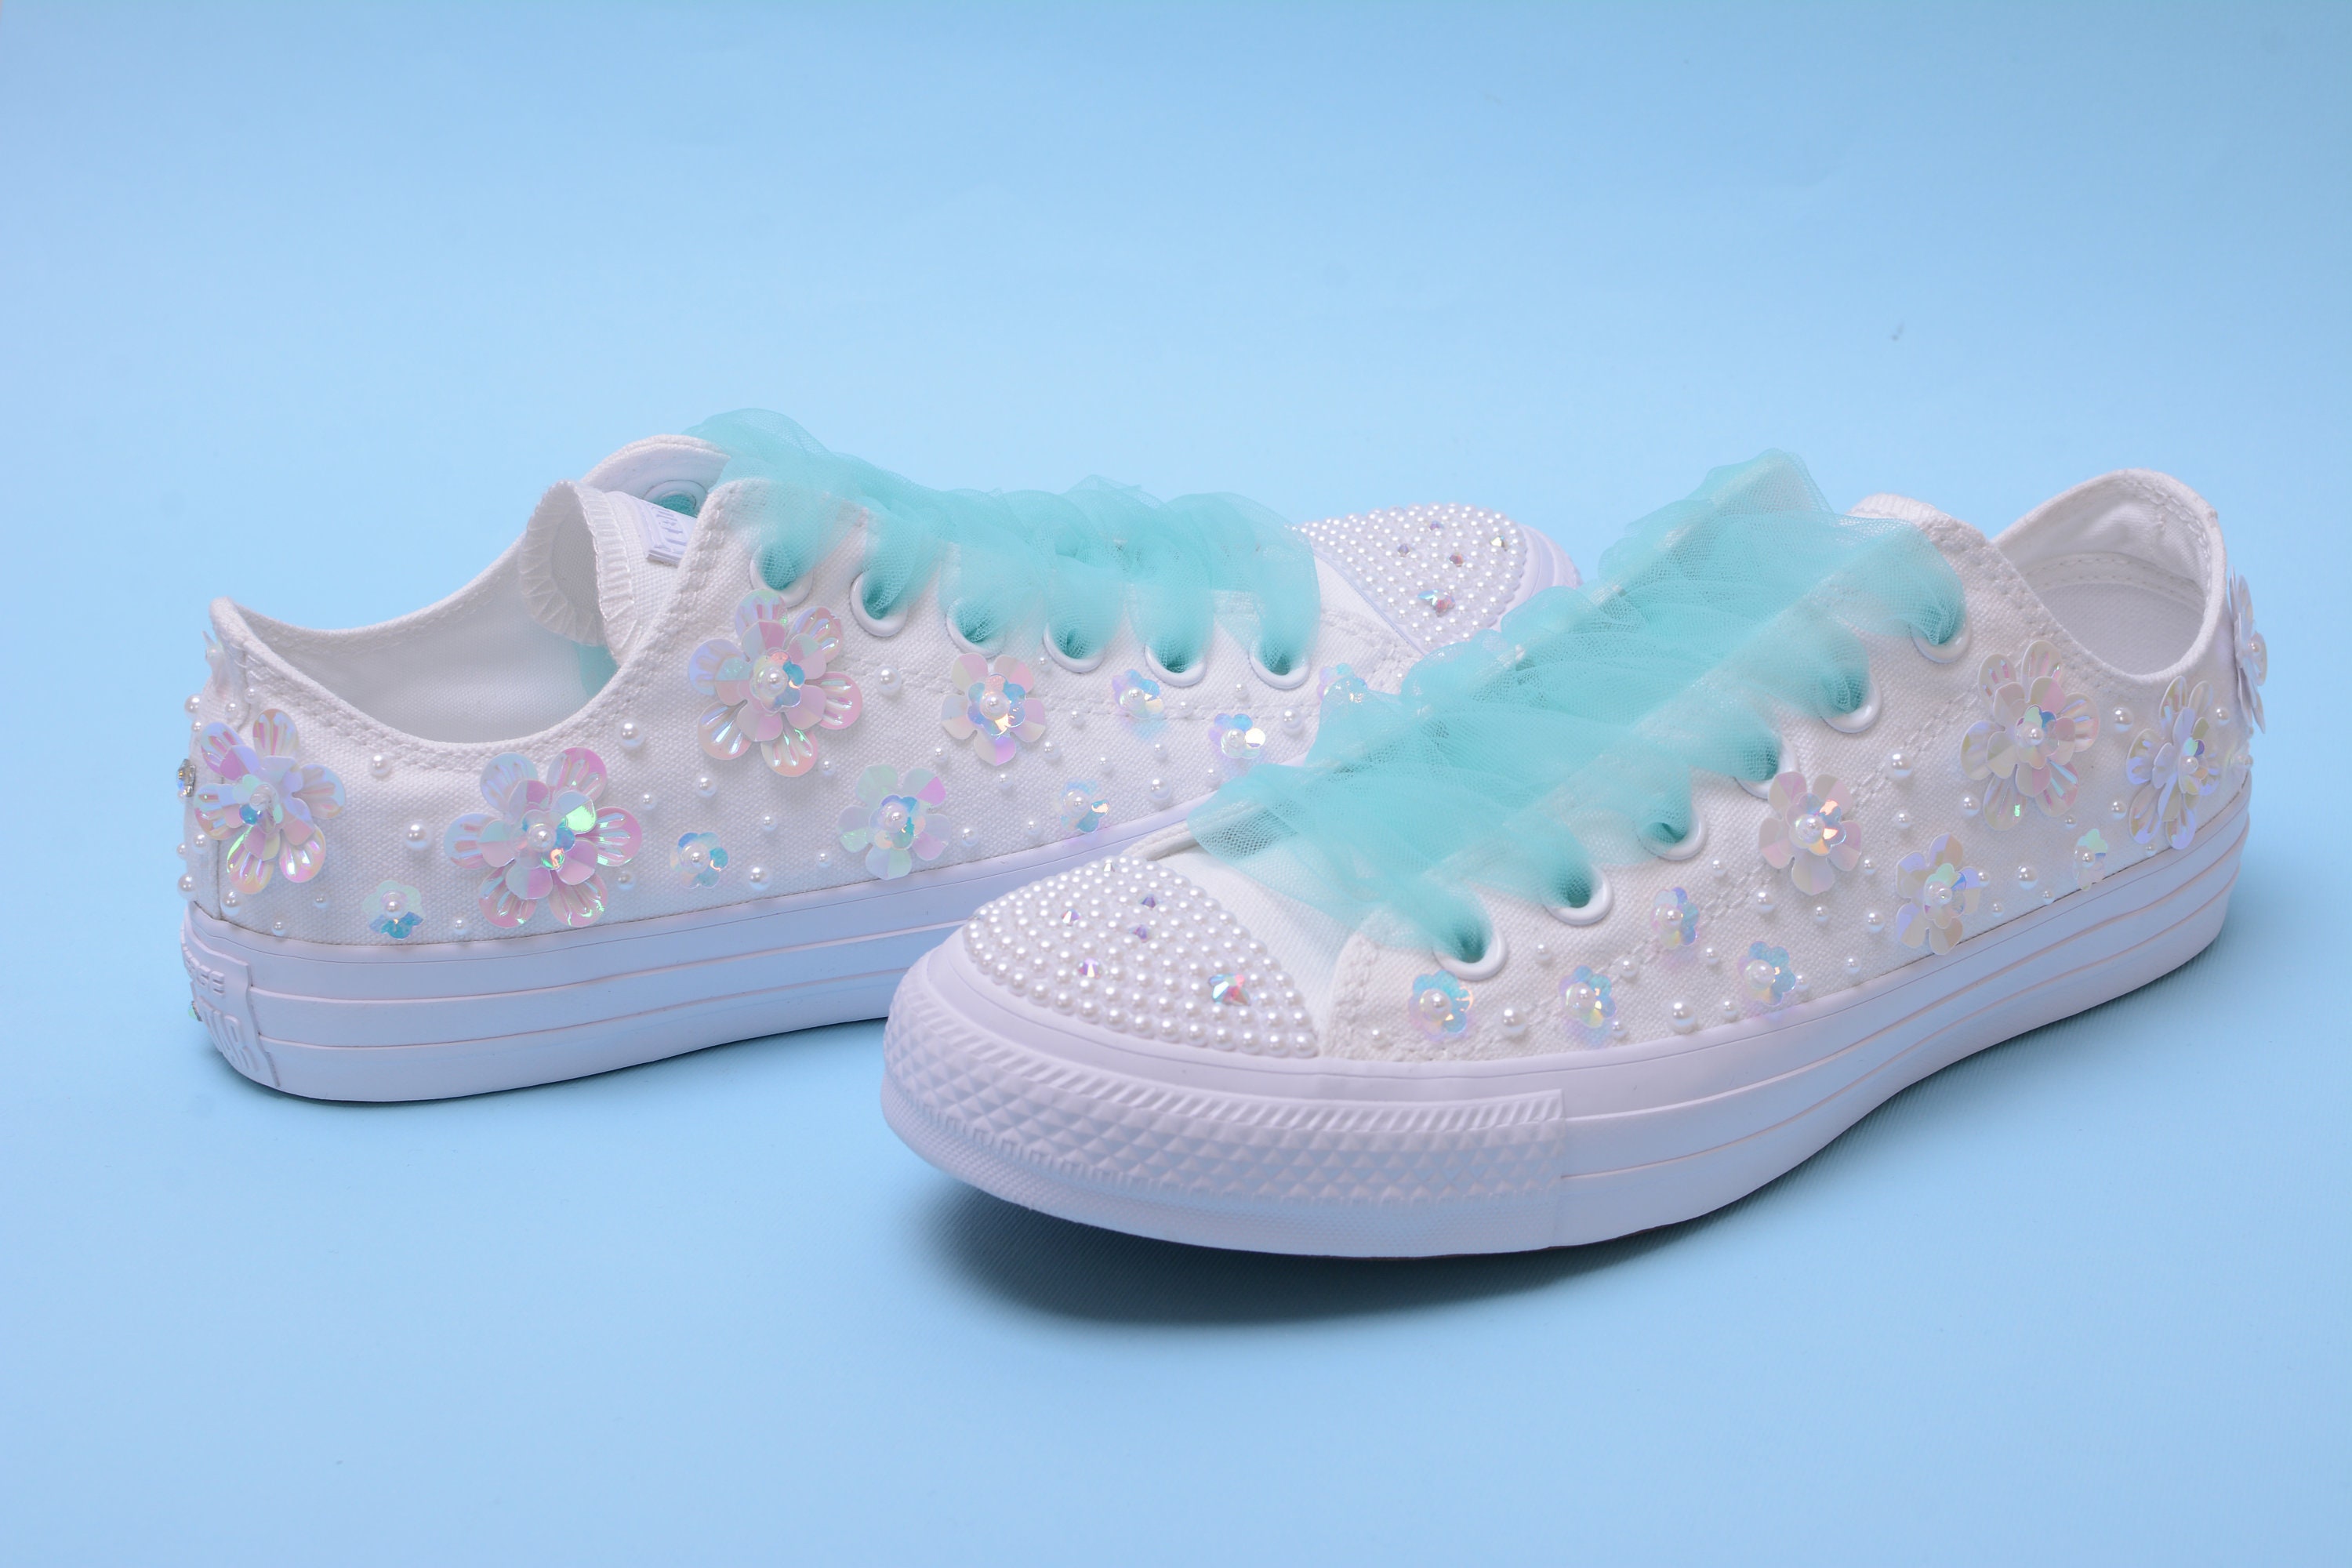 Sparkle Wedding Converse for Bride, Bling Converse with Pearls